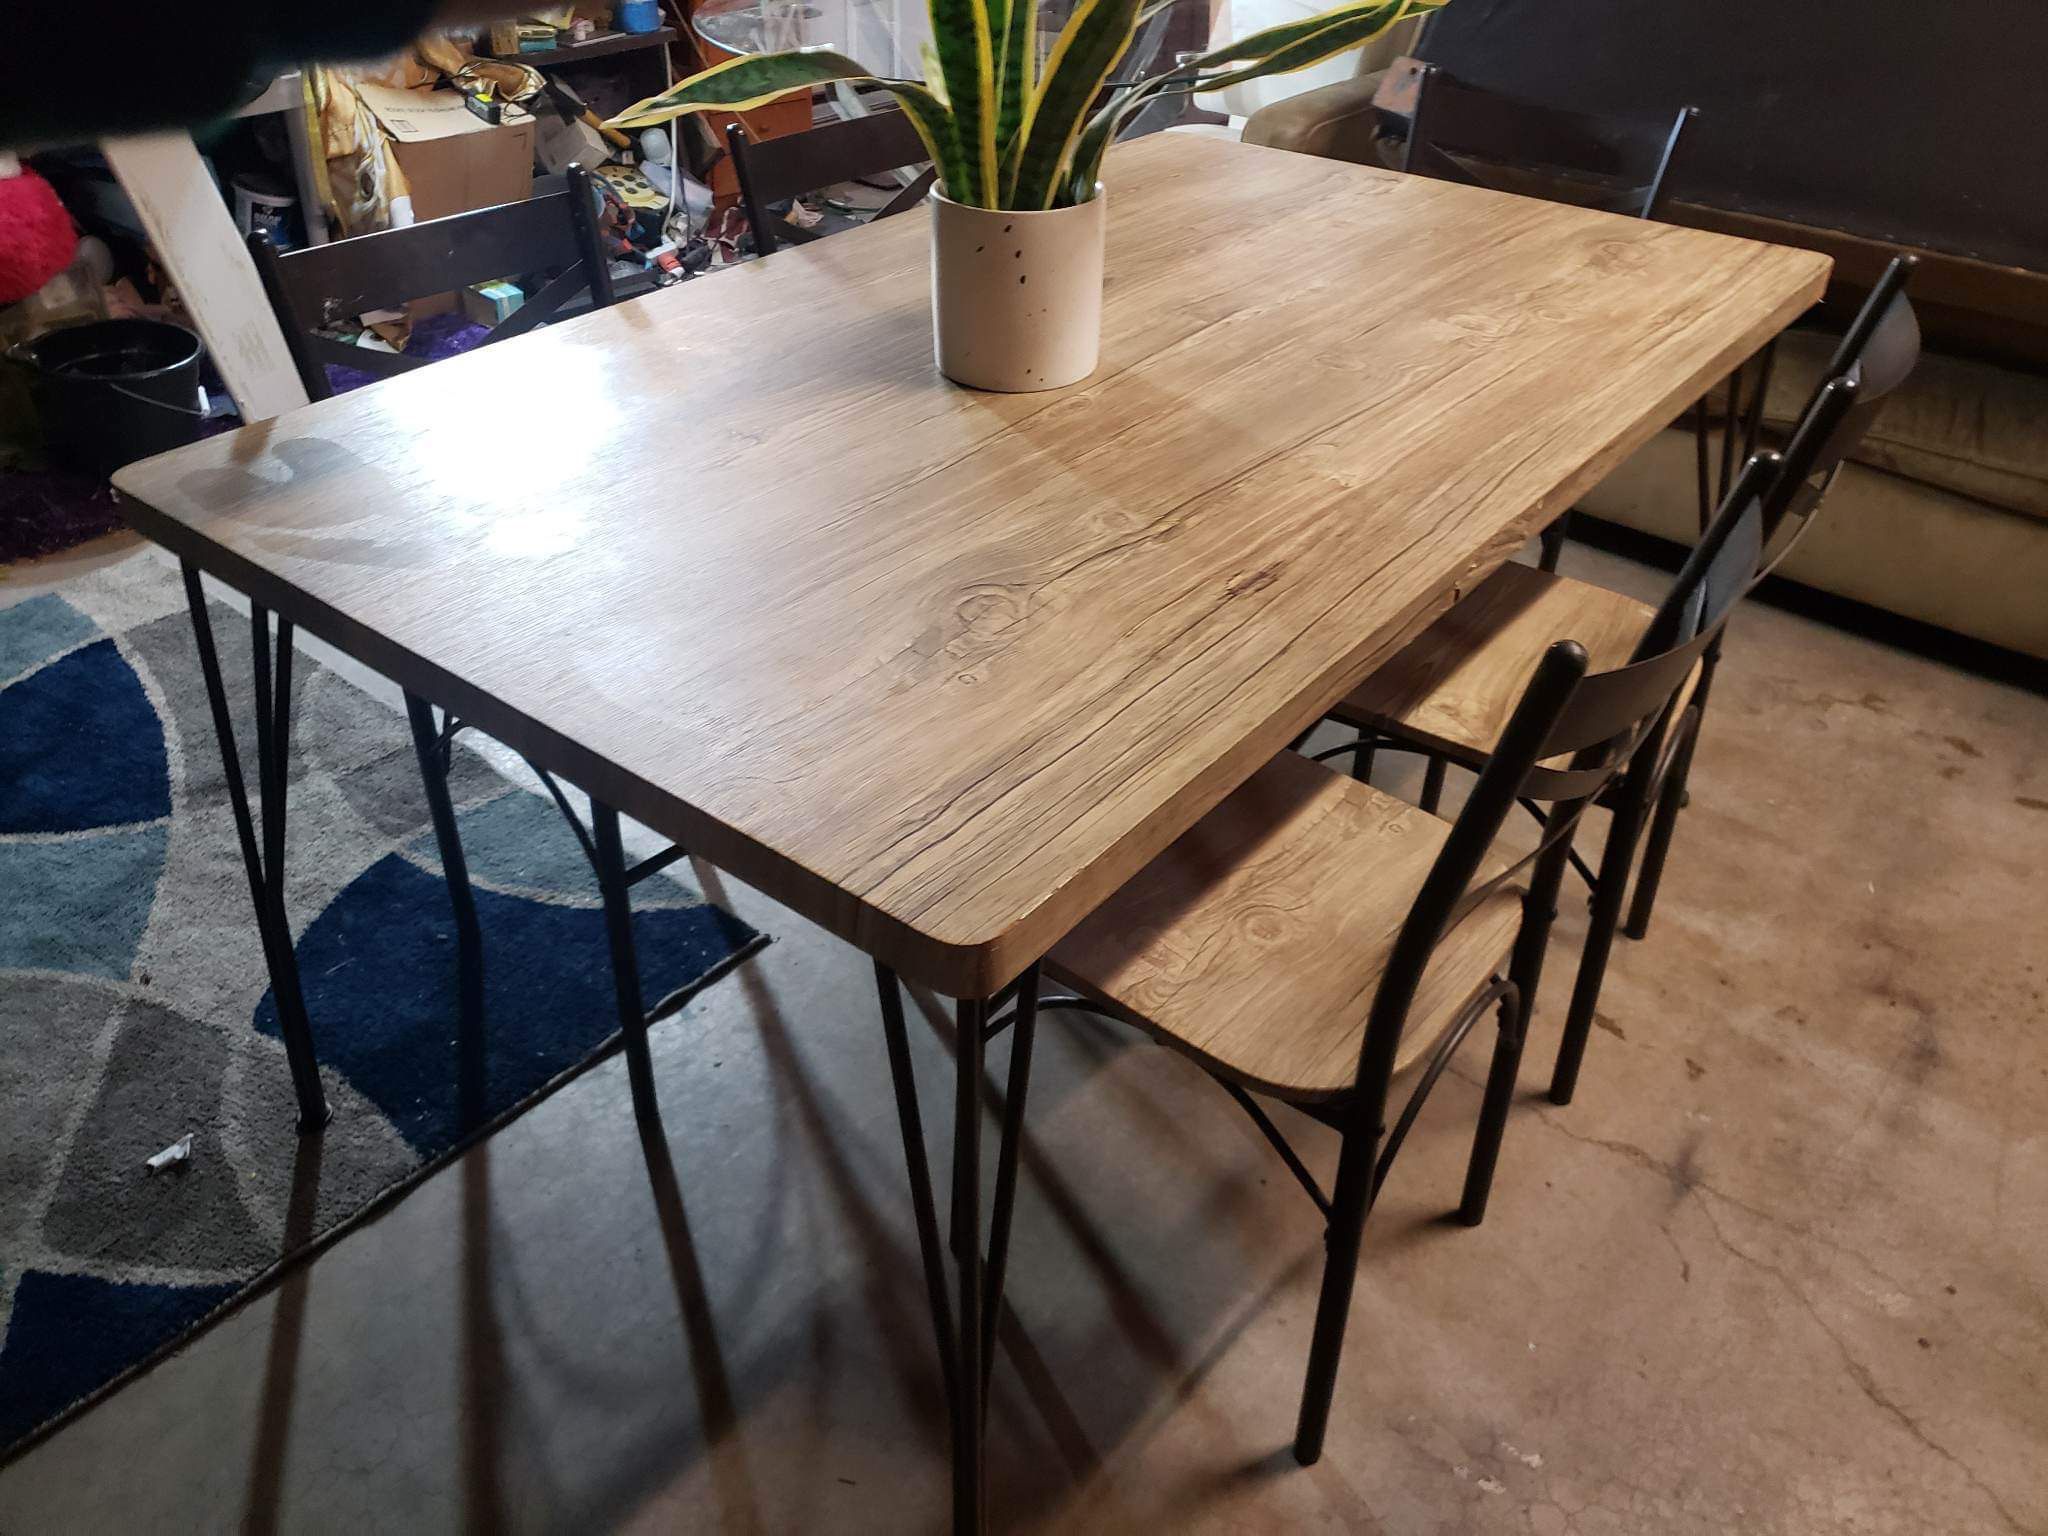 Wall Table for Sale in Las Vegas, NV - OfferUp